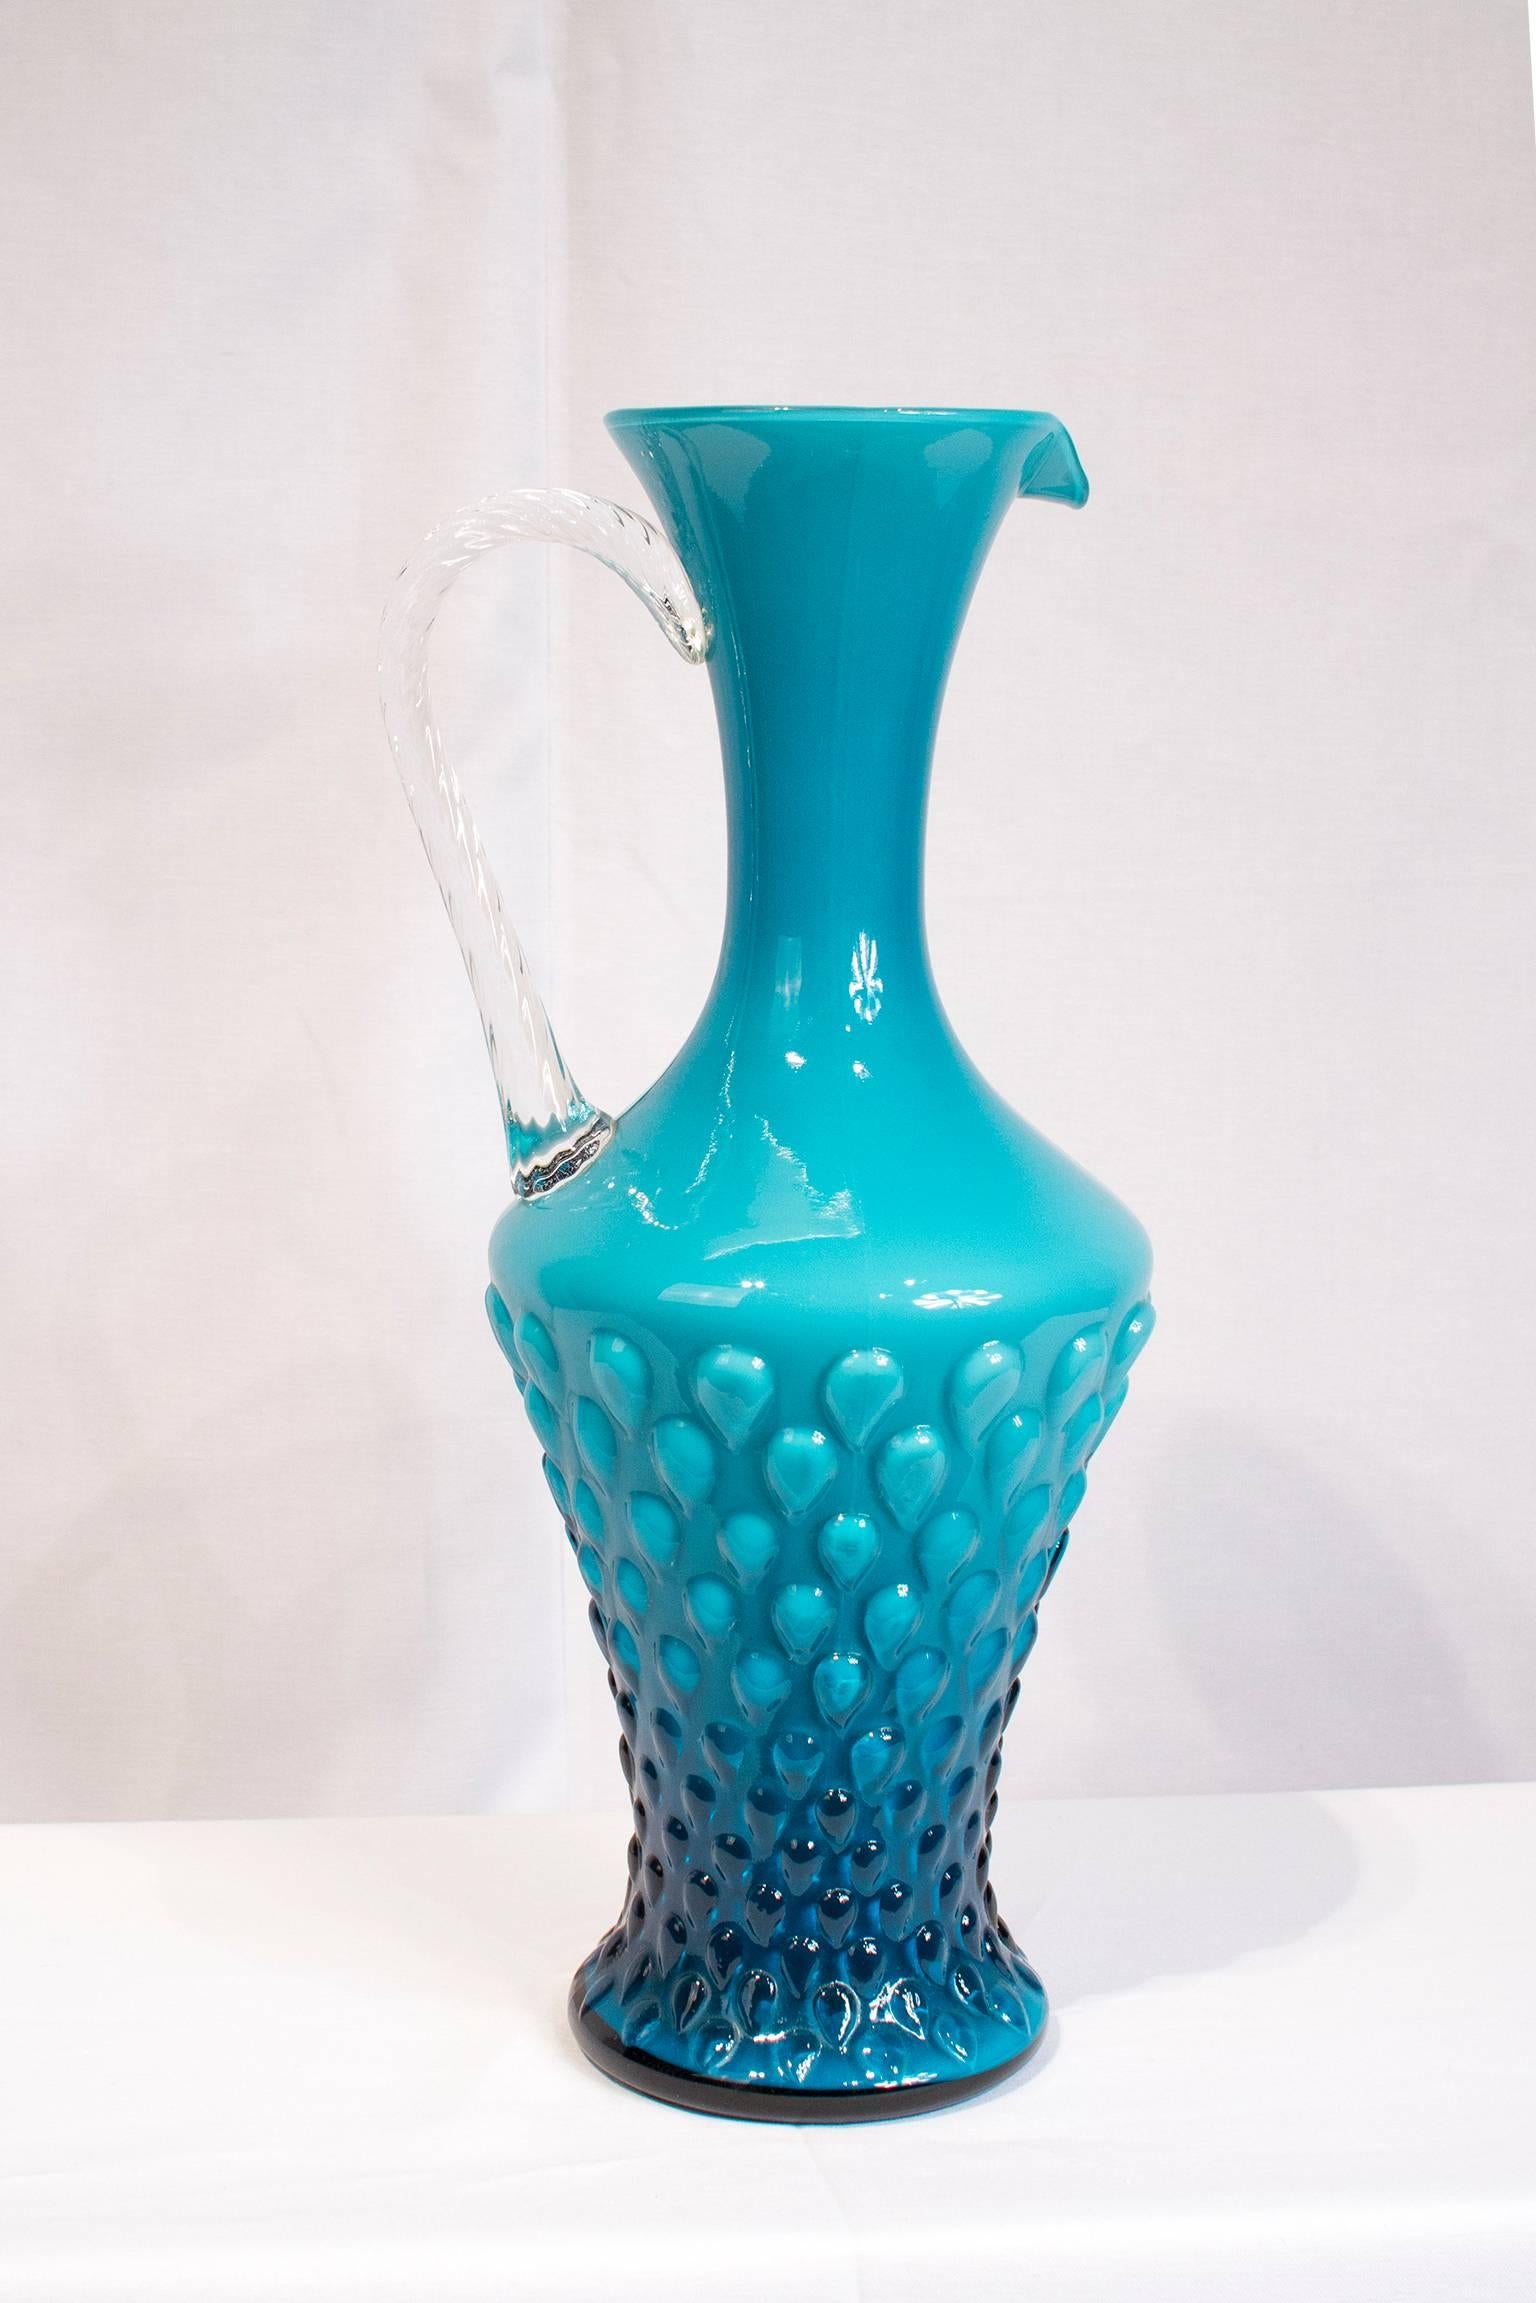 Italian Empoli art glass from the mid-20th century. Excellent condition.
Available in larger assortments.  
Please look at our Storefront page to browse our entire collection. 